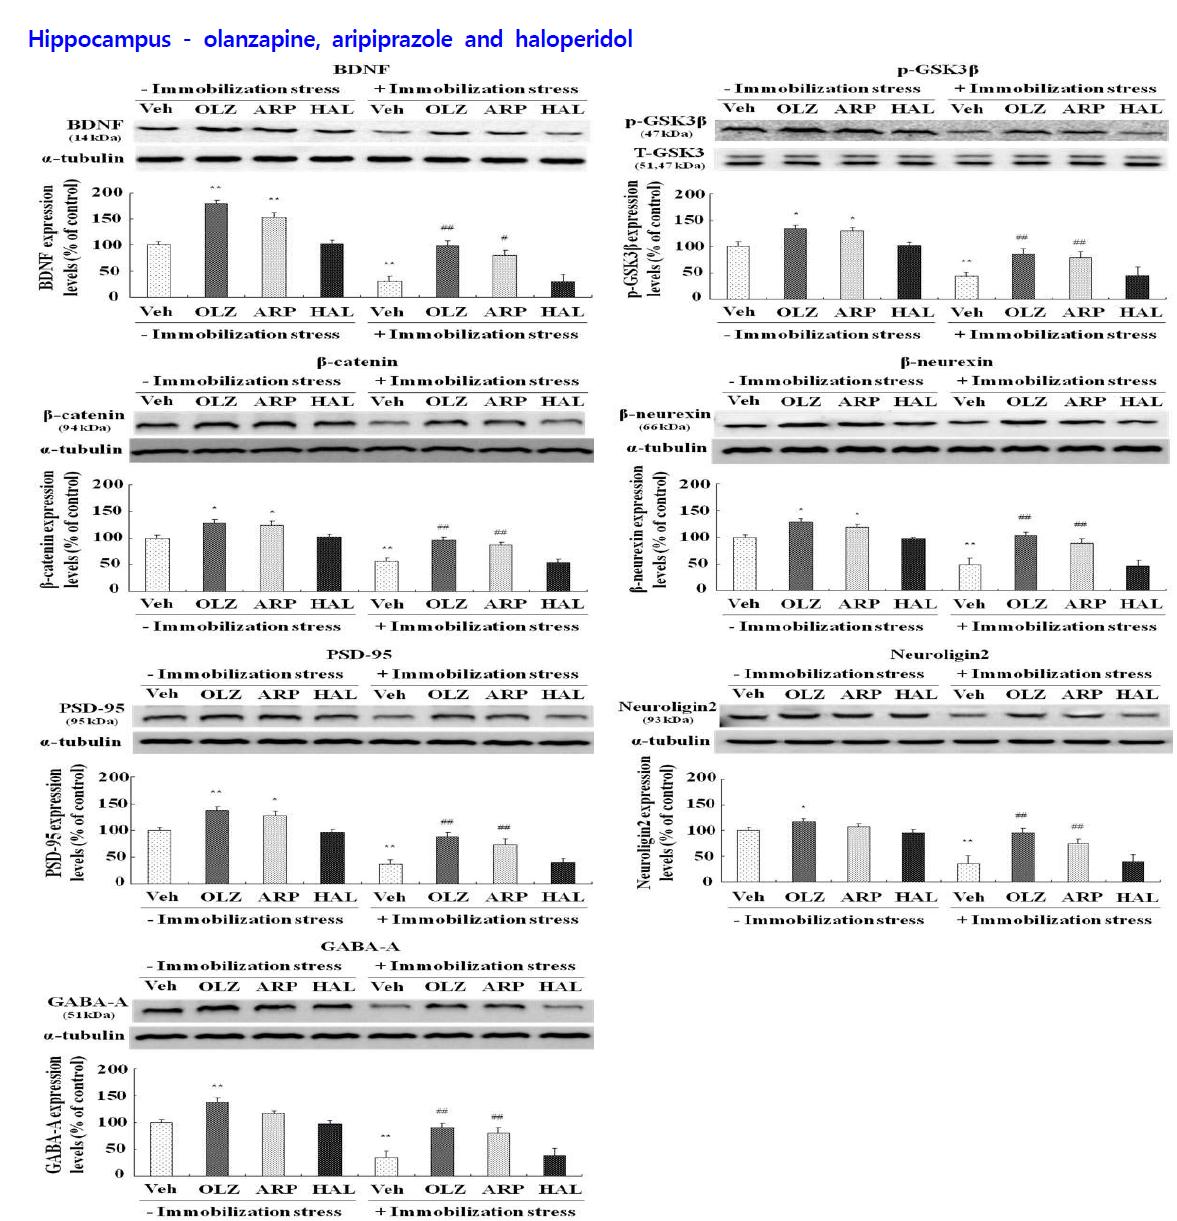 Effects of antipsychotic drugs on the levels of BDNF, phospho-ser9-GSK-3β, β-catenin, β-neurexin, PSD-95, neurologin 2 and GABA-A expression in hippocampus of rats